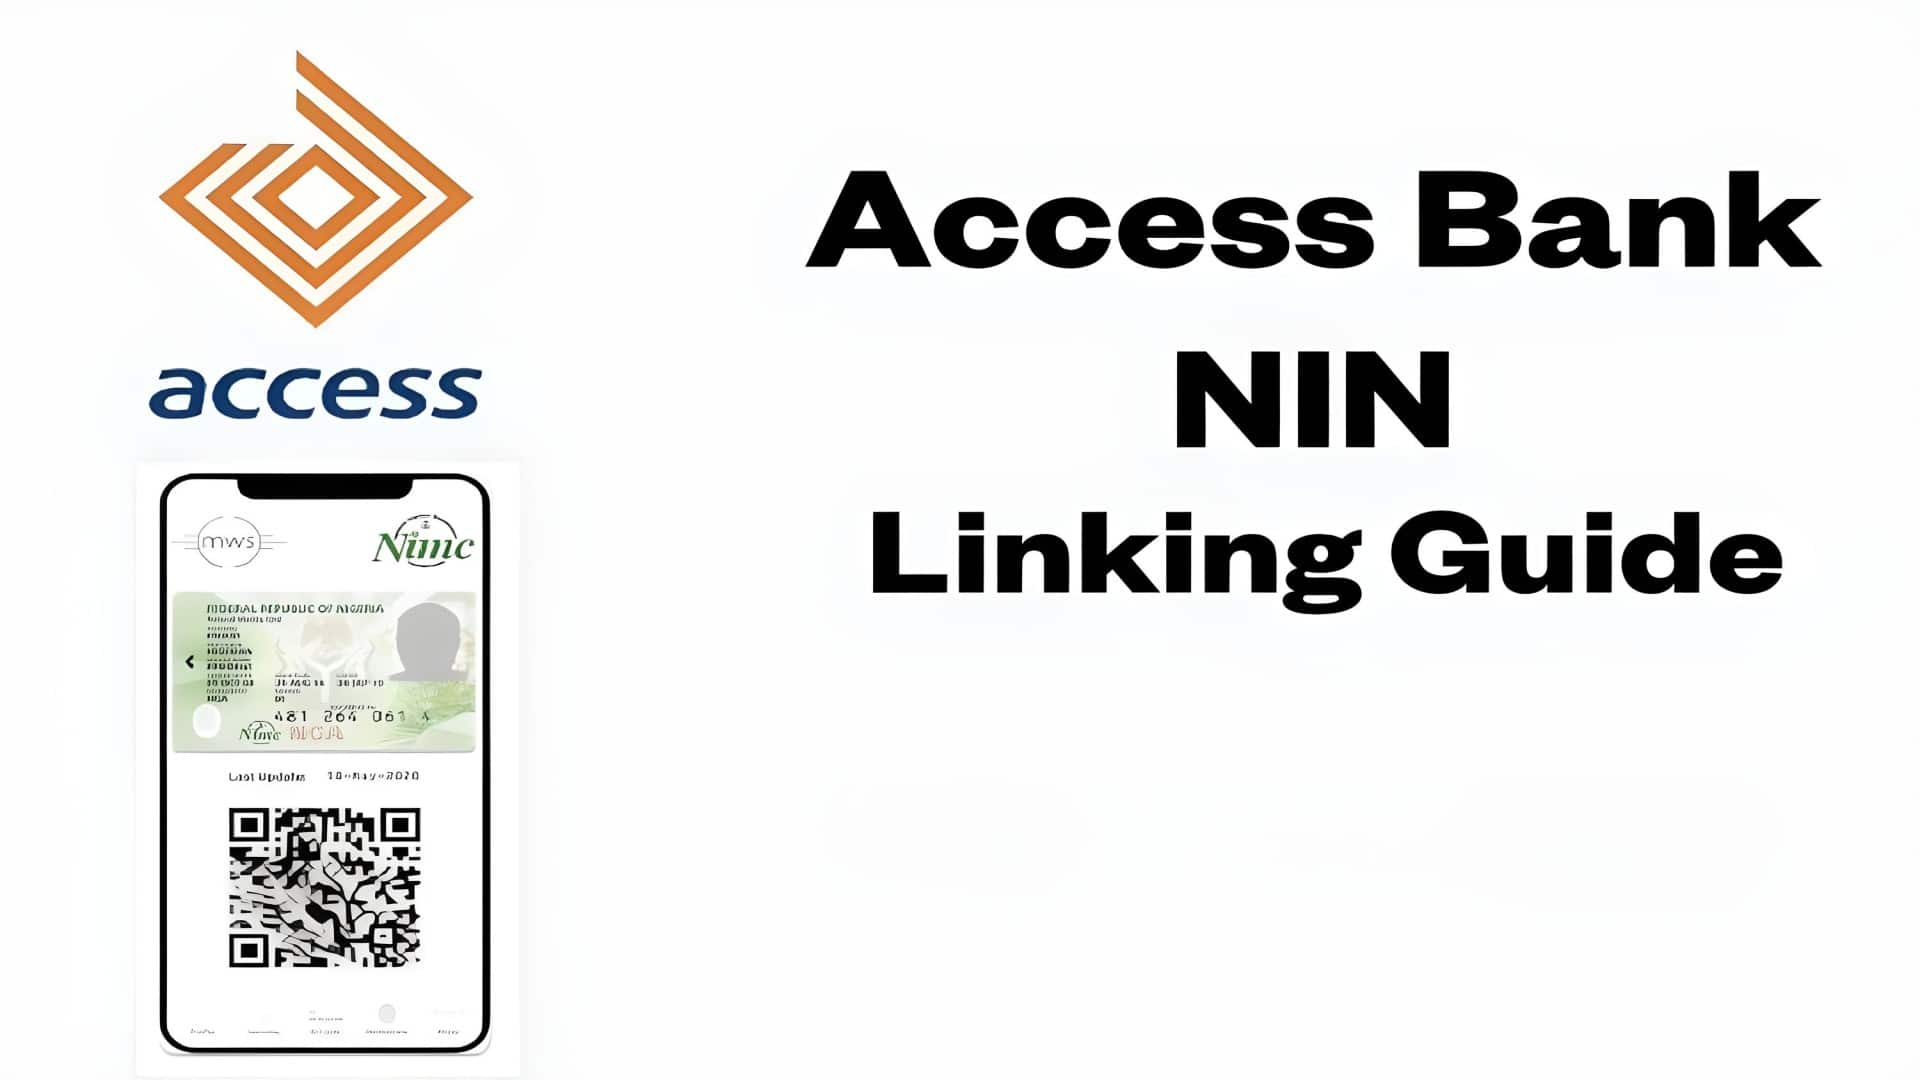 Link Your National Identification Number (NIN) to Your Access Bank 